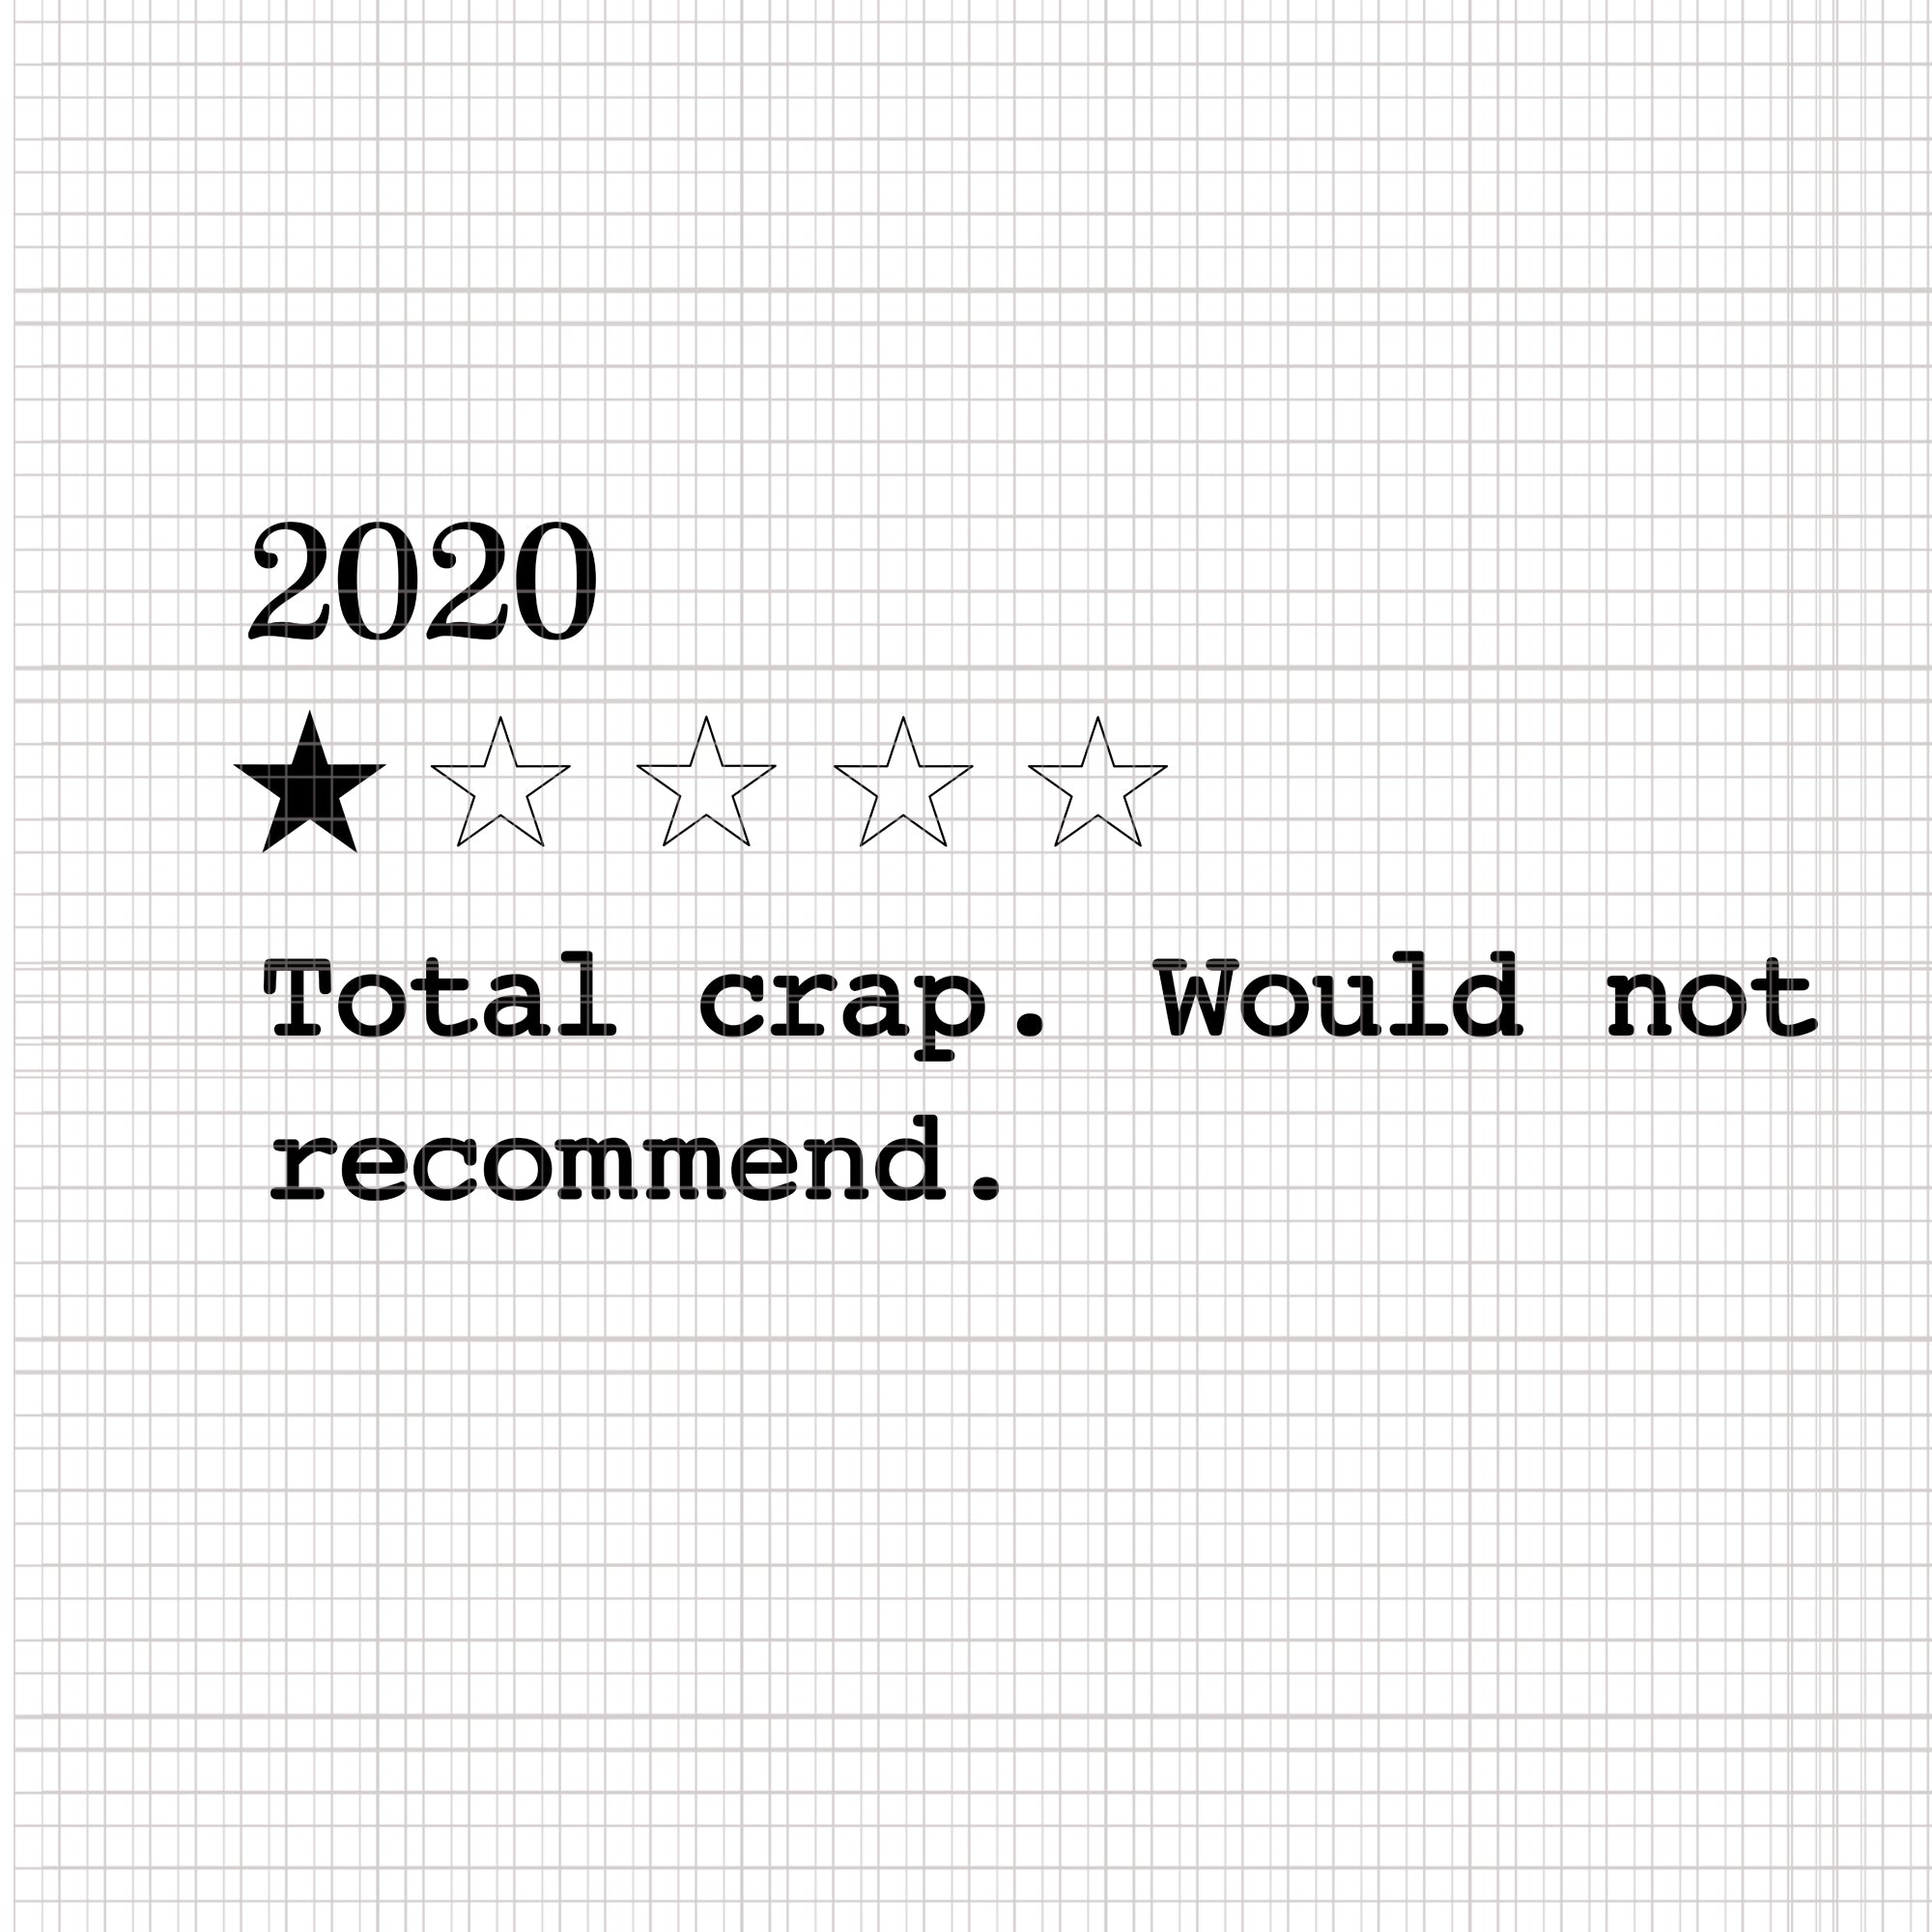 2020 Review One Star Rating svg, 2020 Review One Star Rating,  Total Crap Not Would Recommend, 2020 Total Crap Not Would Recommend svg,  2020 Total Crap Not Would Recommend